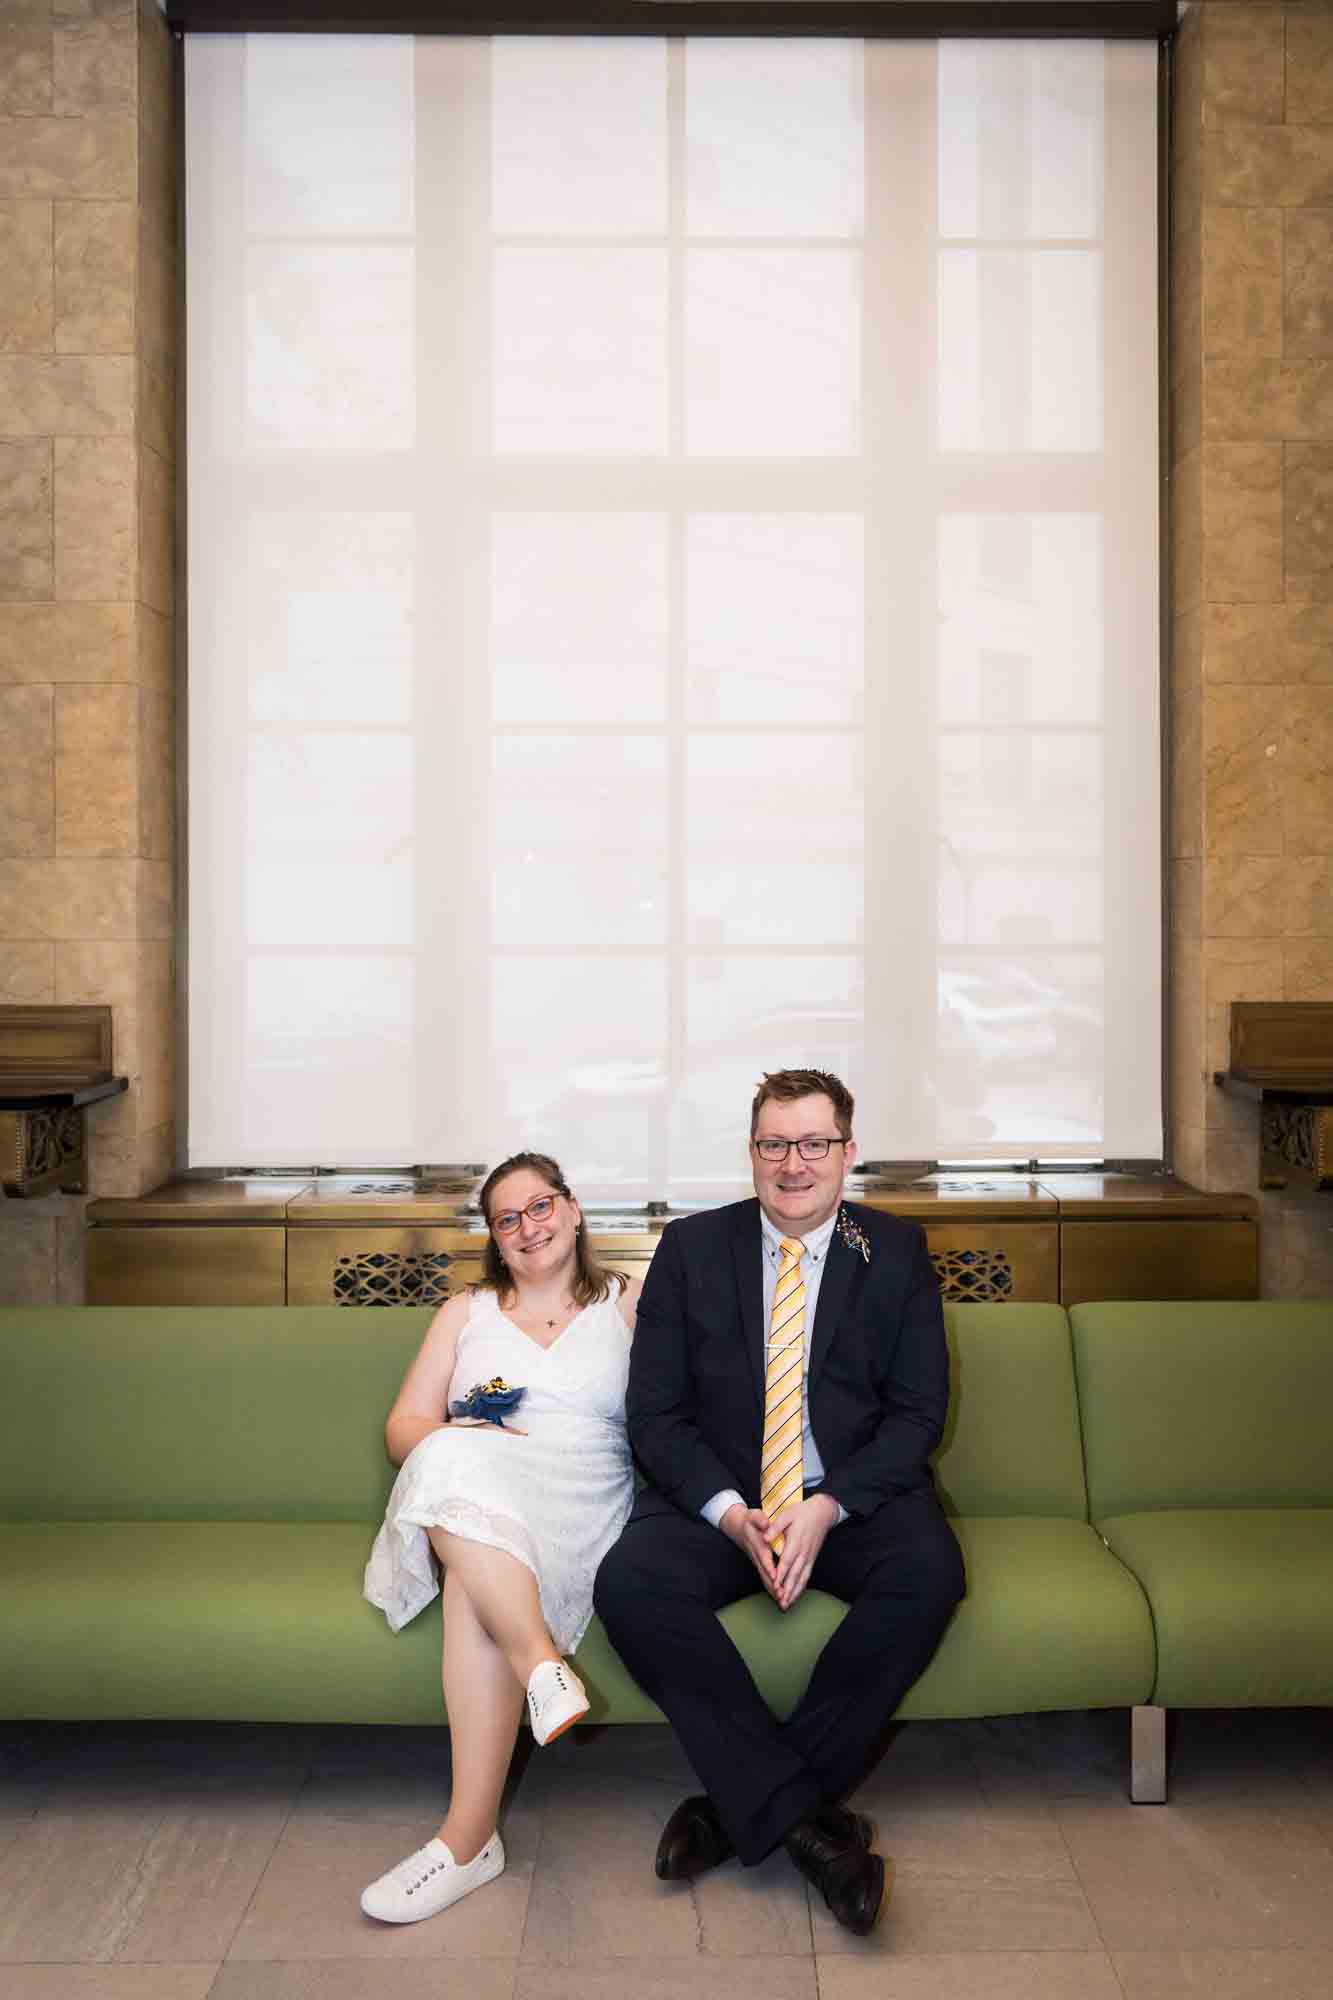 Bride and groom sitting on green couch in front of large window with white shade for an article on how to get a marriage license in San Antonio